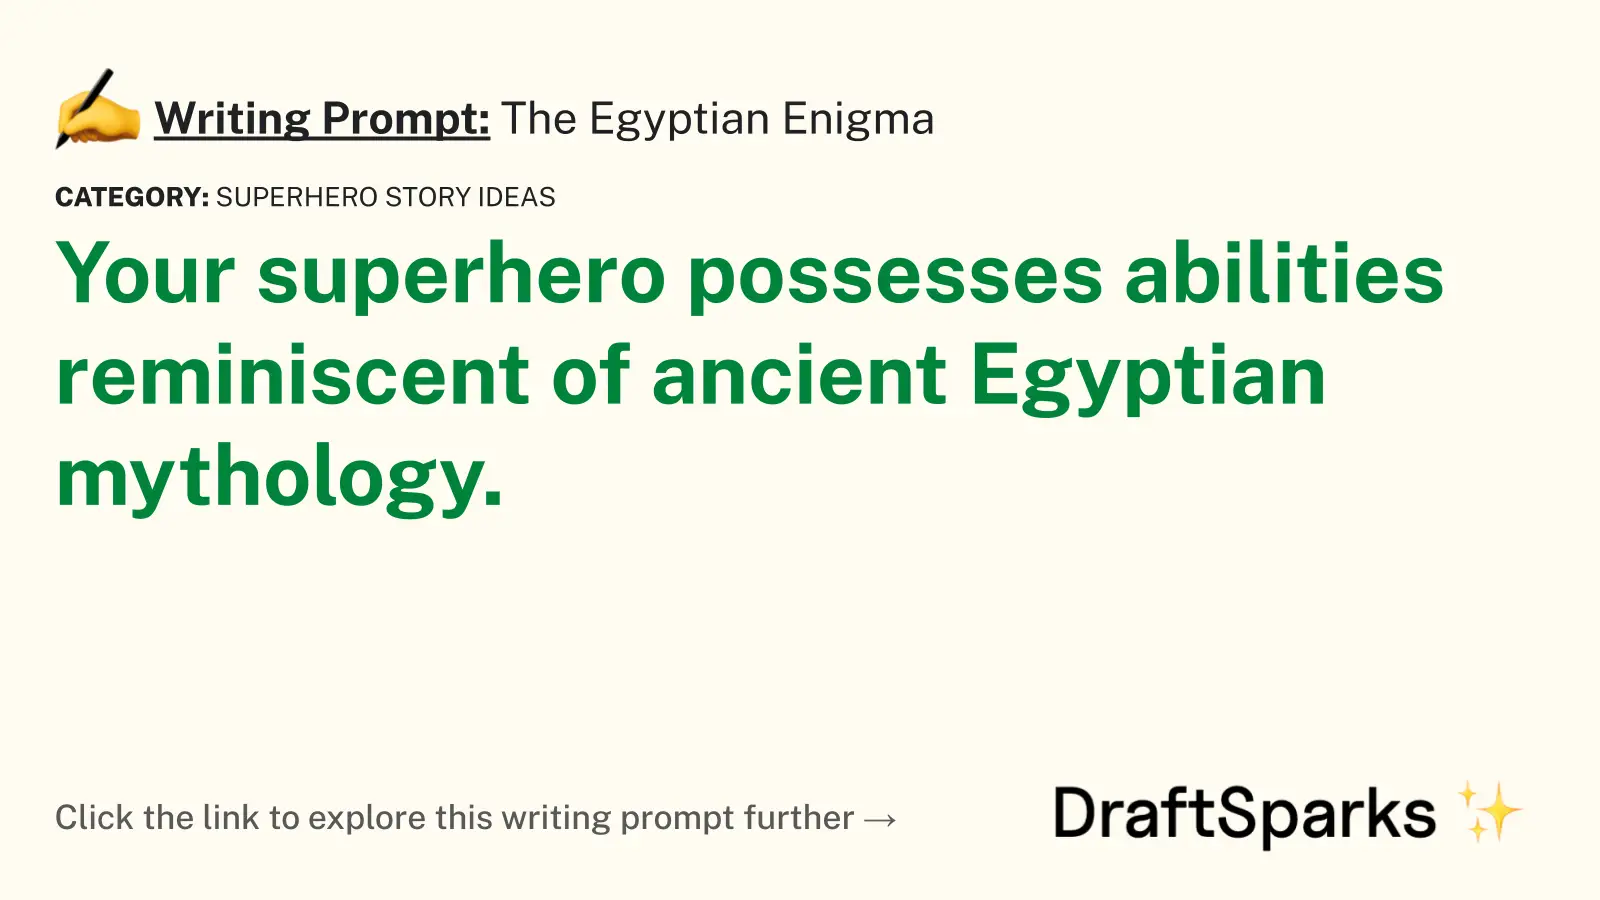 The Egyptian Enigma